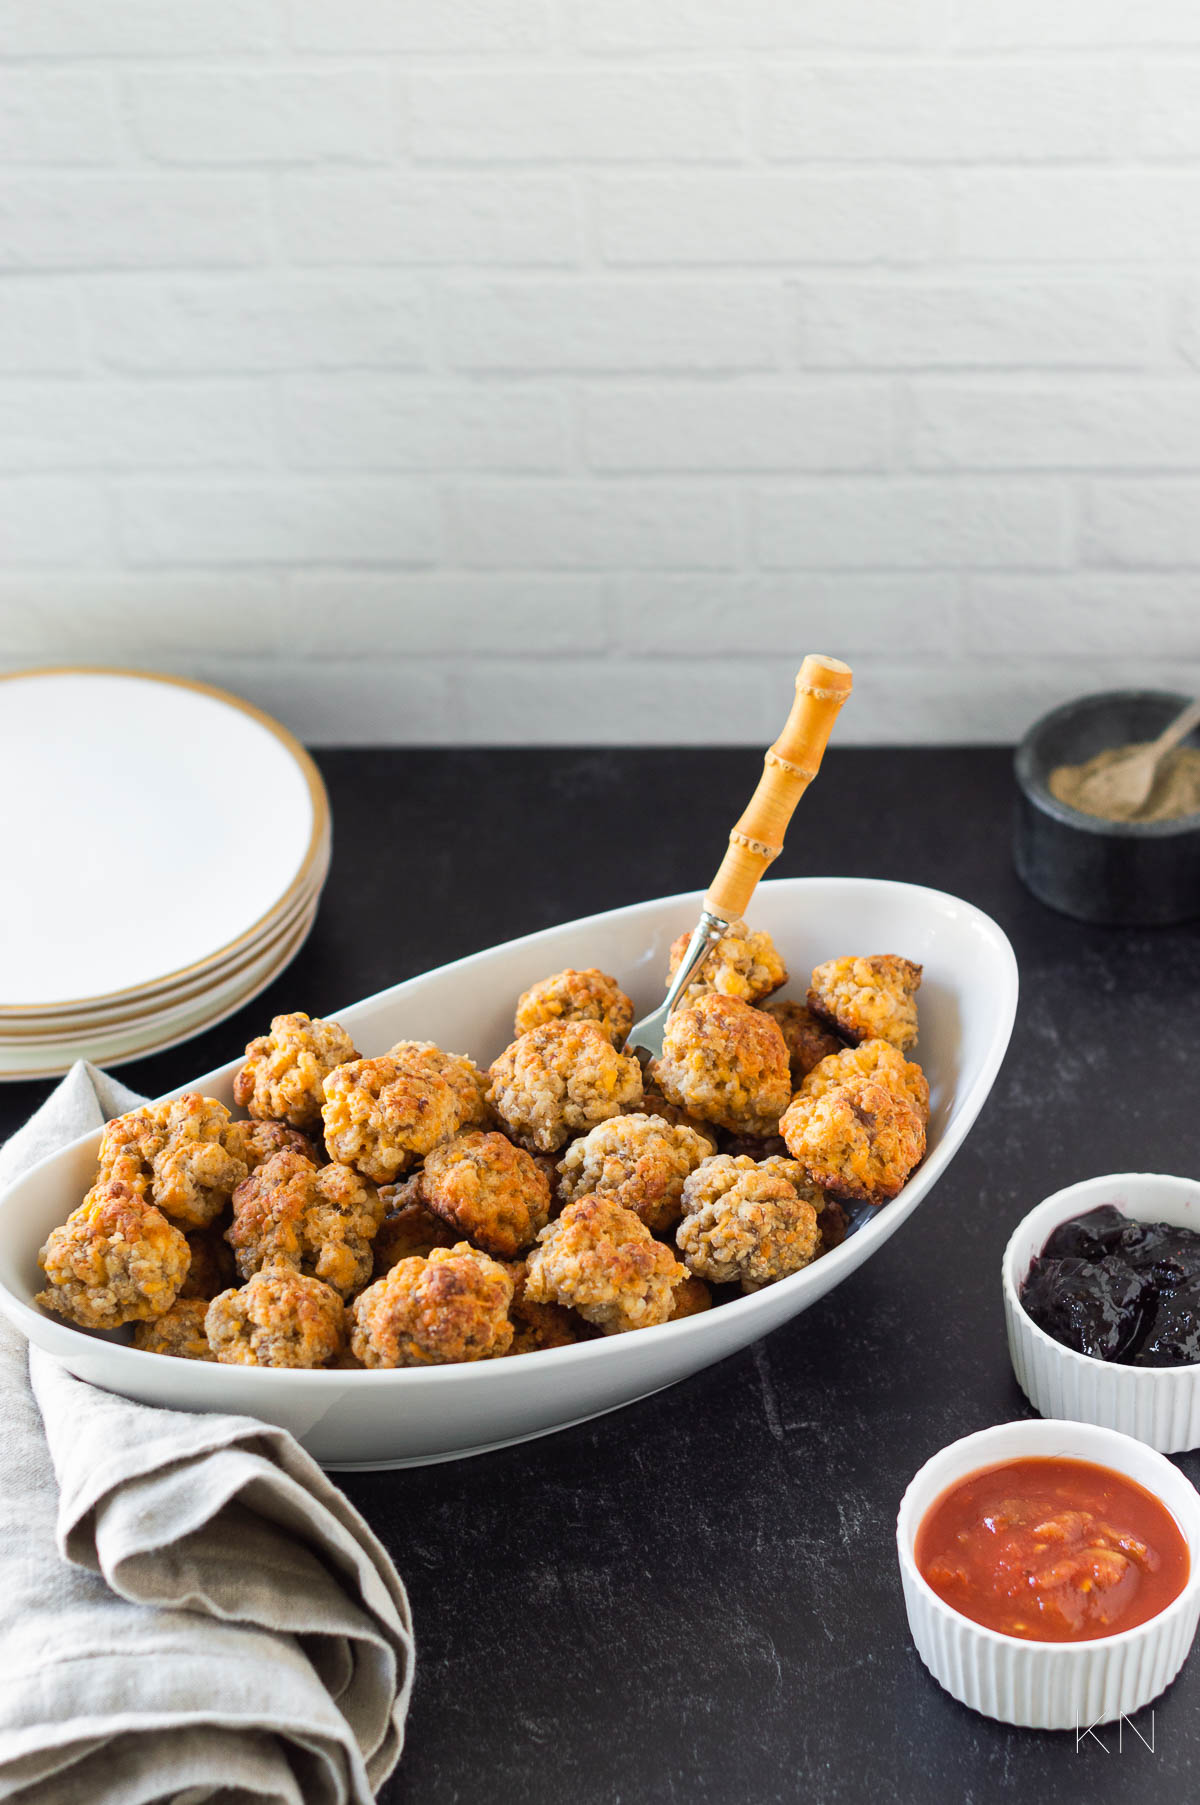 How to Make Sausage Balls with Cream Cheese